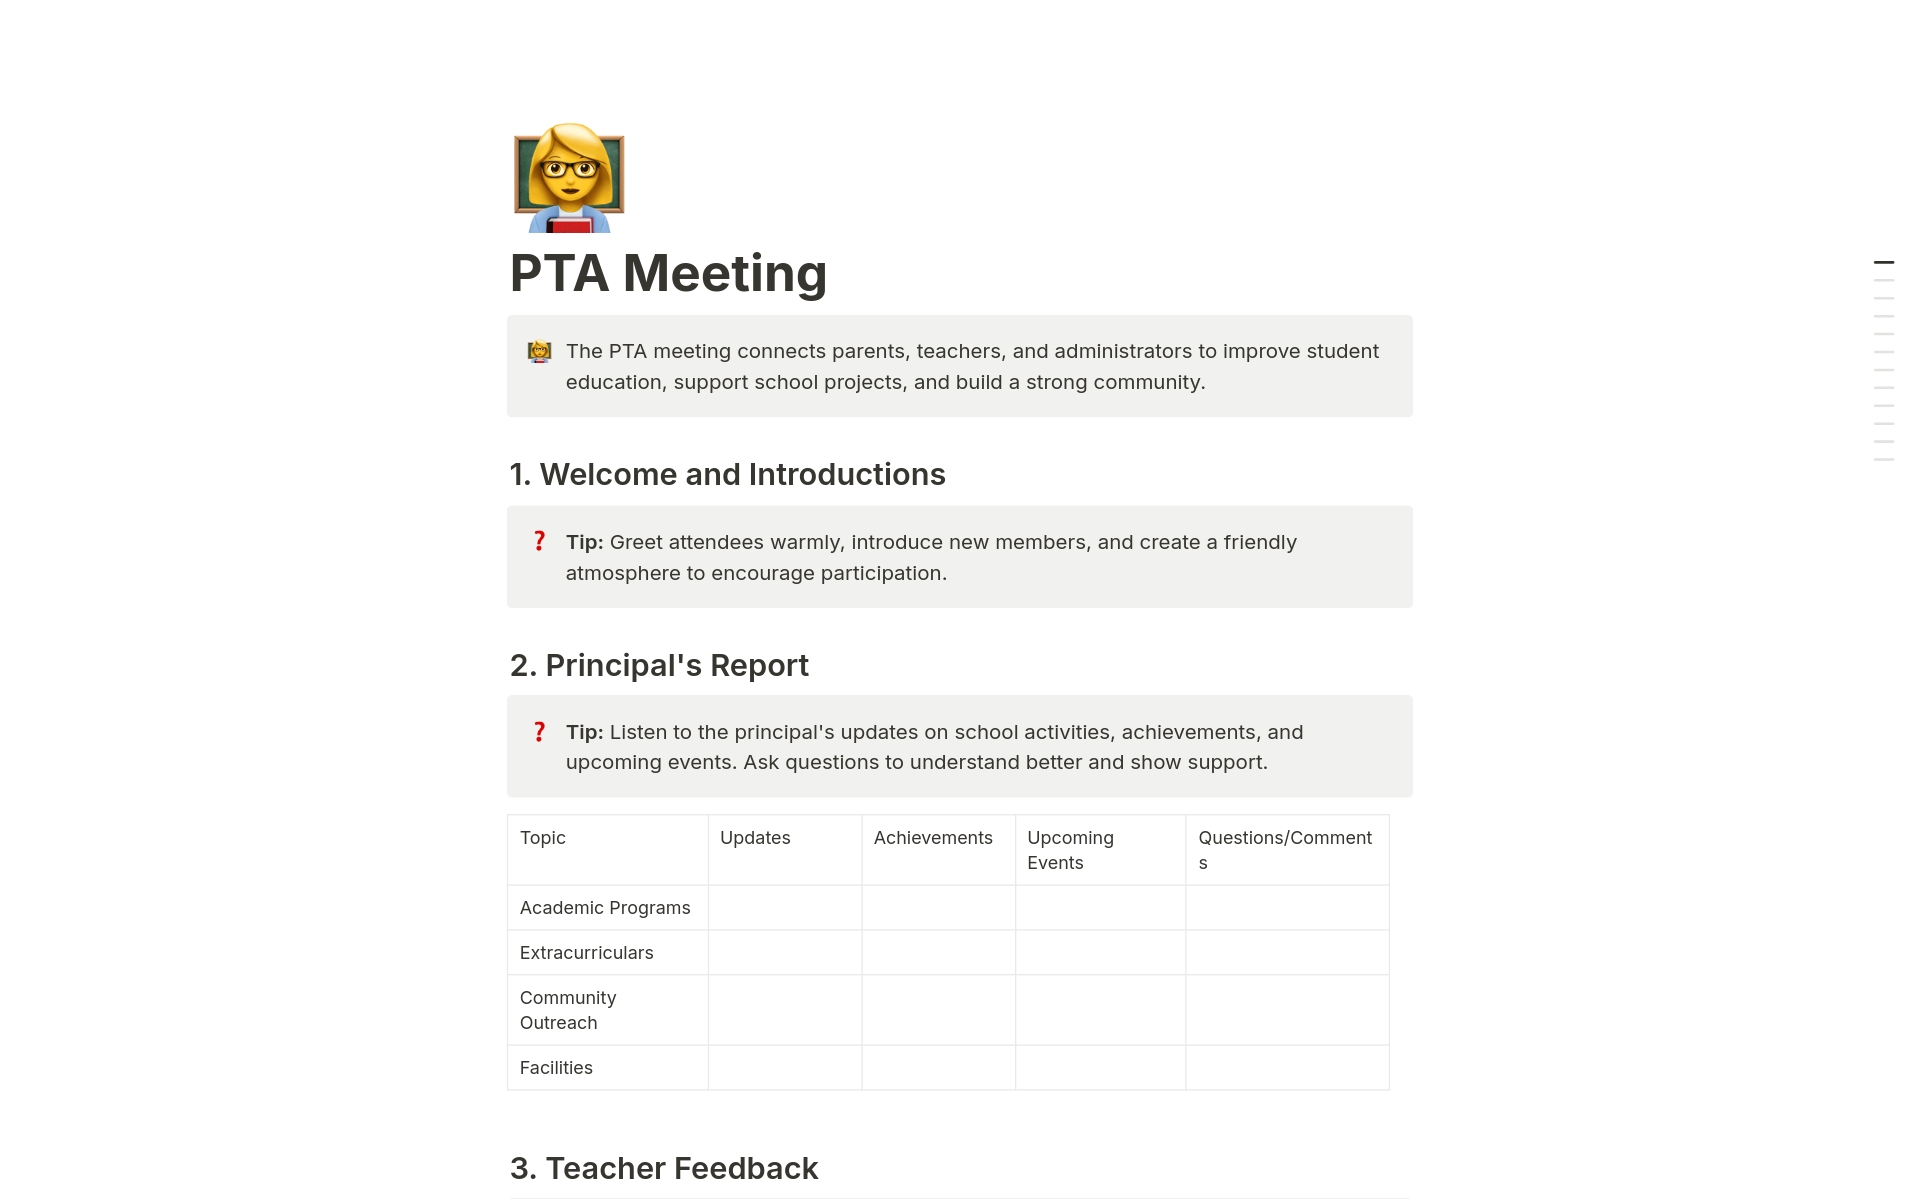 The PTA meeting connects parents, teachers, and administrators to improve student education, support school projects, and build a strong community.